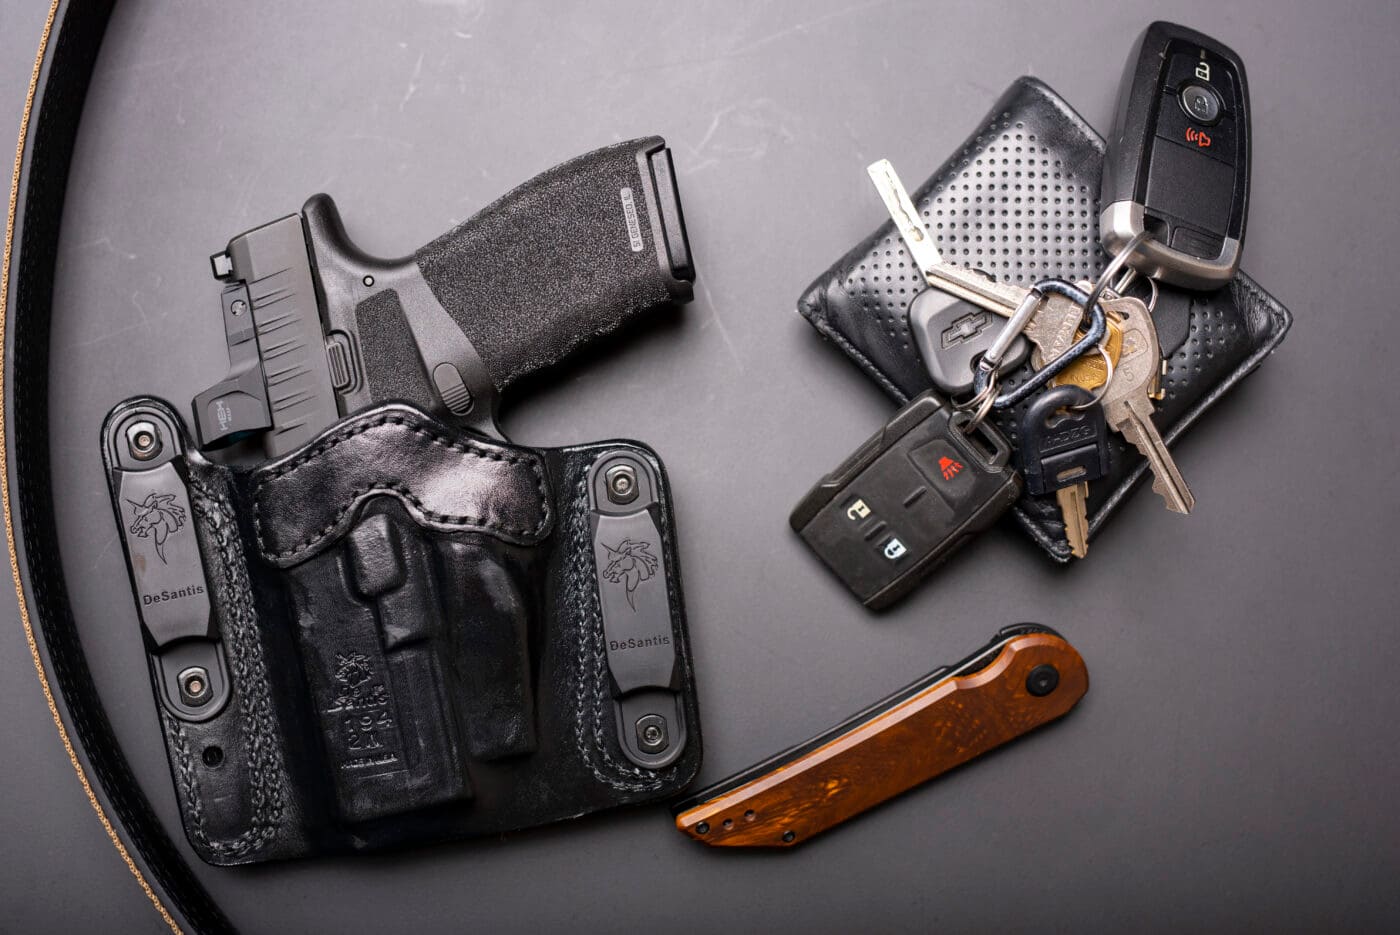 desantis grd holster testing and review